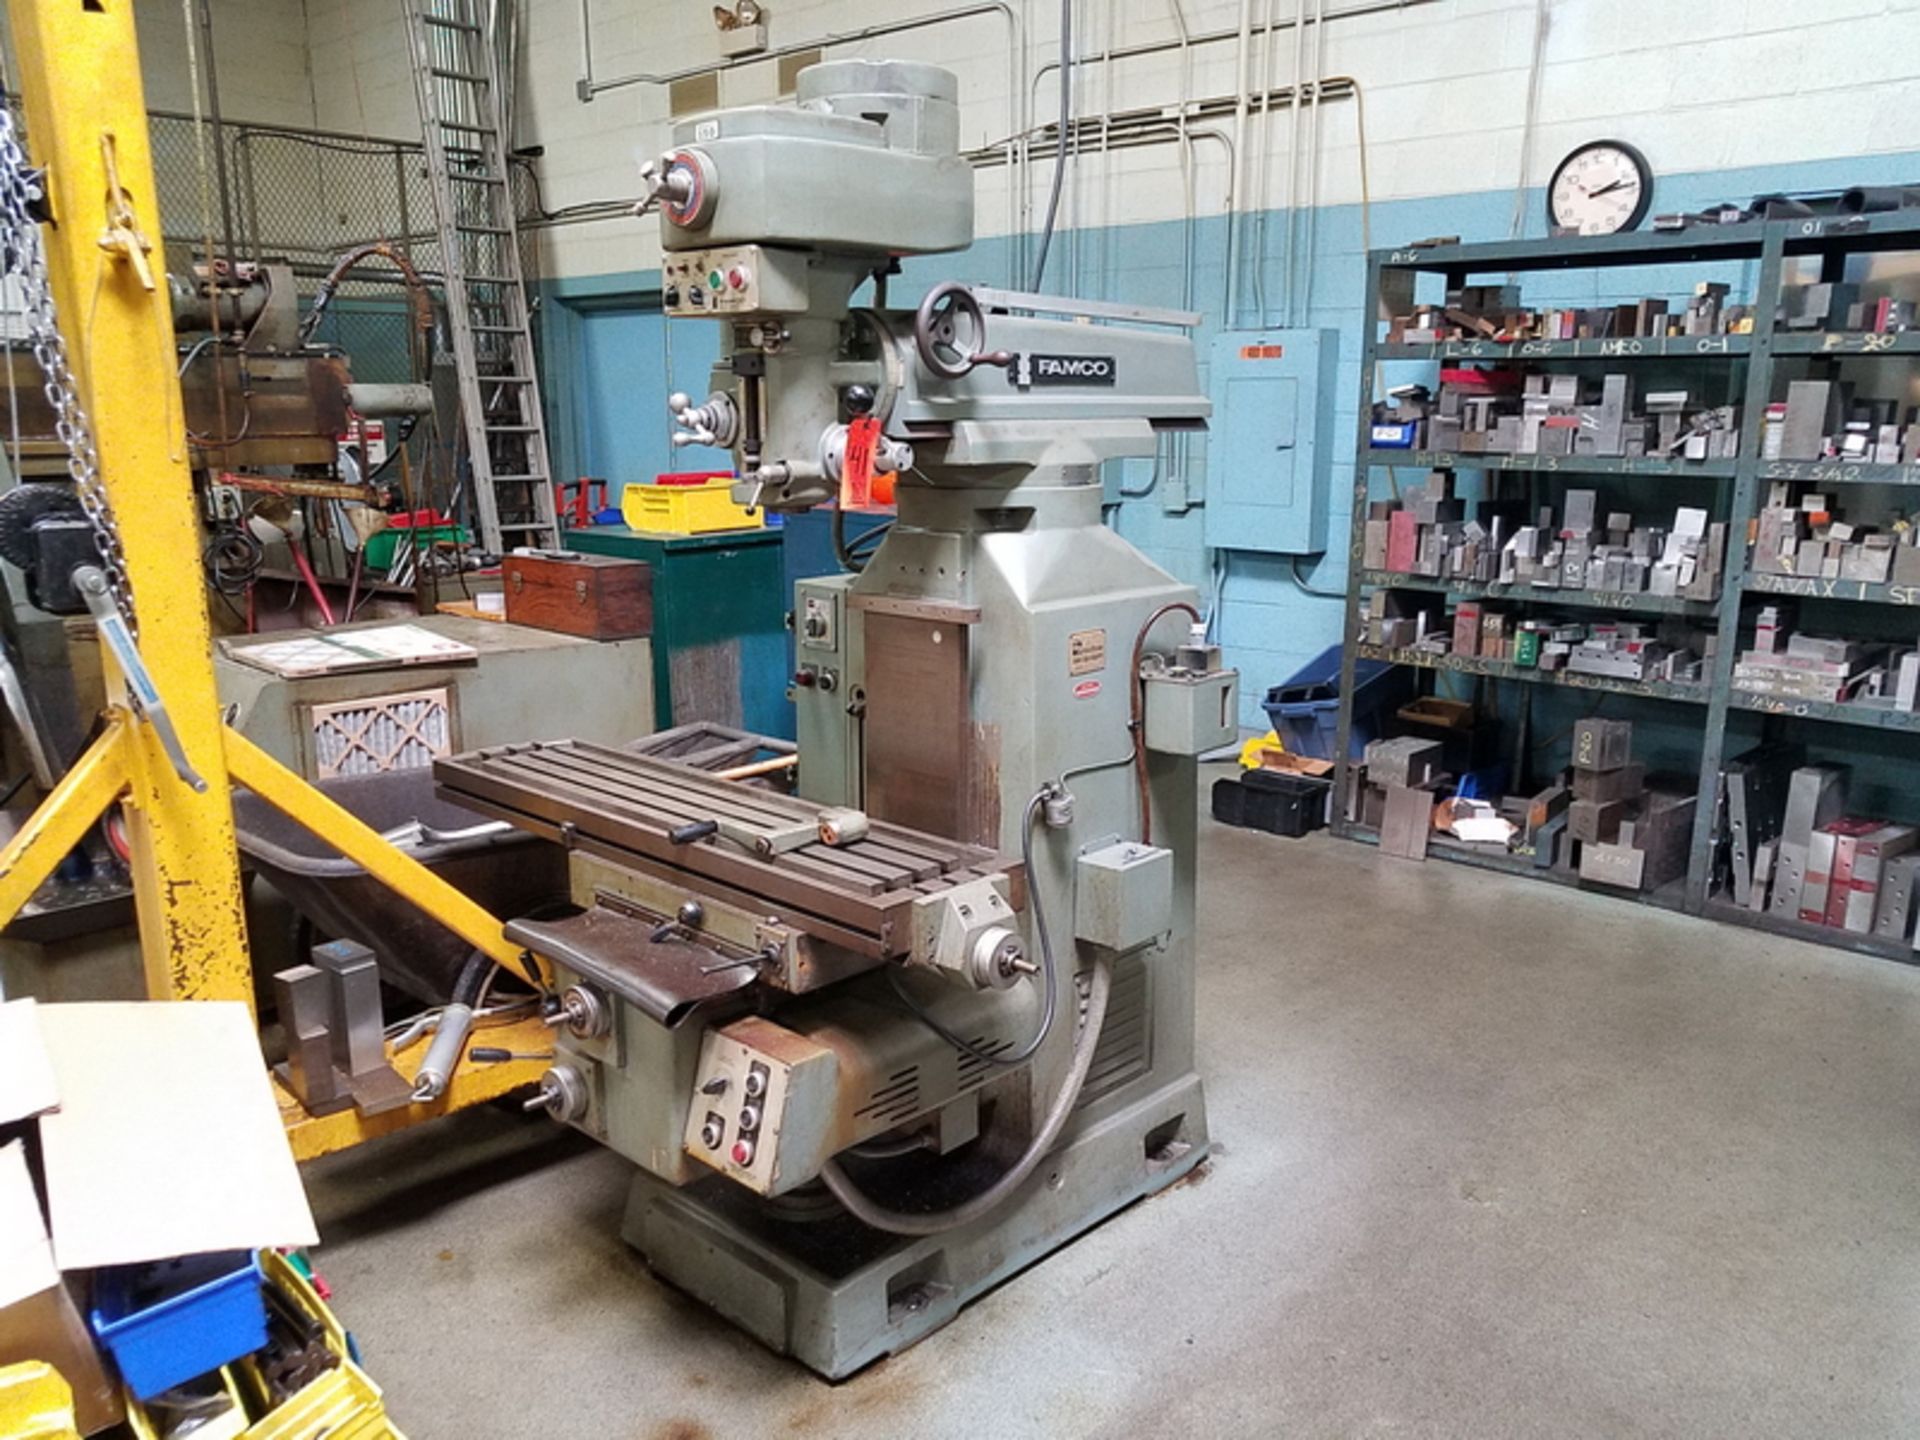 Famco 3-HP Model 150 Vertical Milling Machine, S/N: M-271450; with Rapid Feed, R-8 Spindle, 4.5 - Image 2 of 5